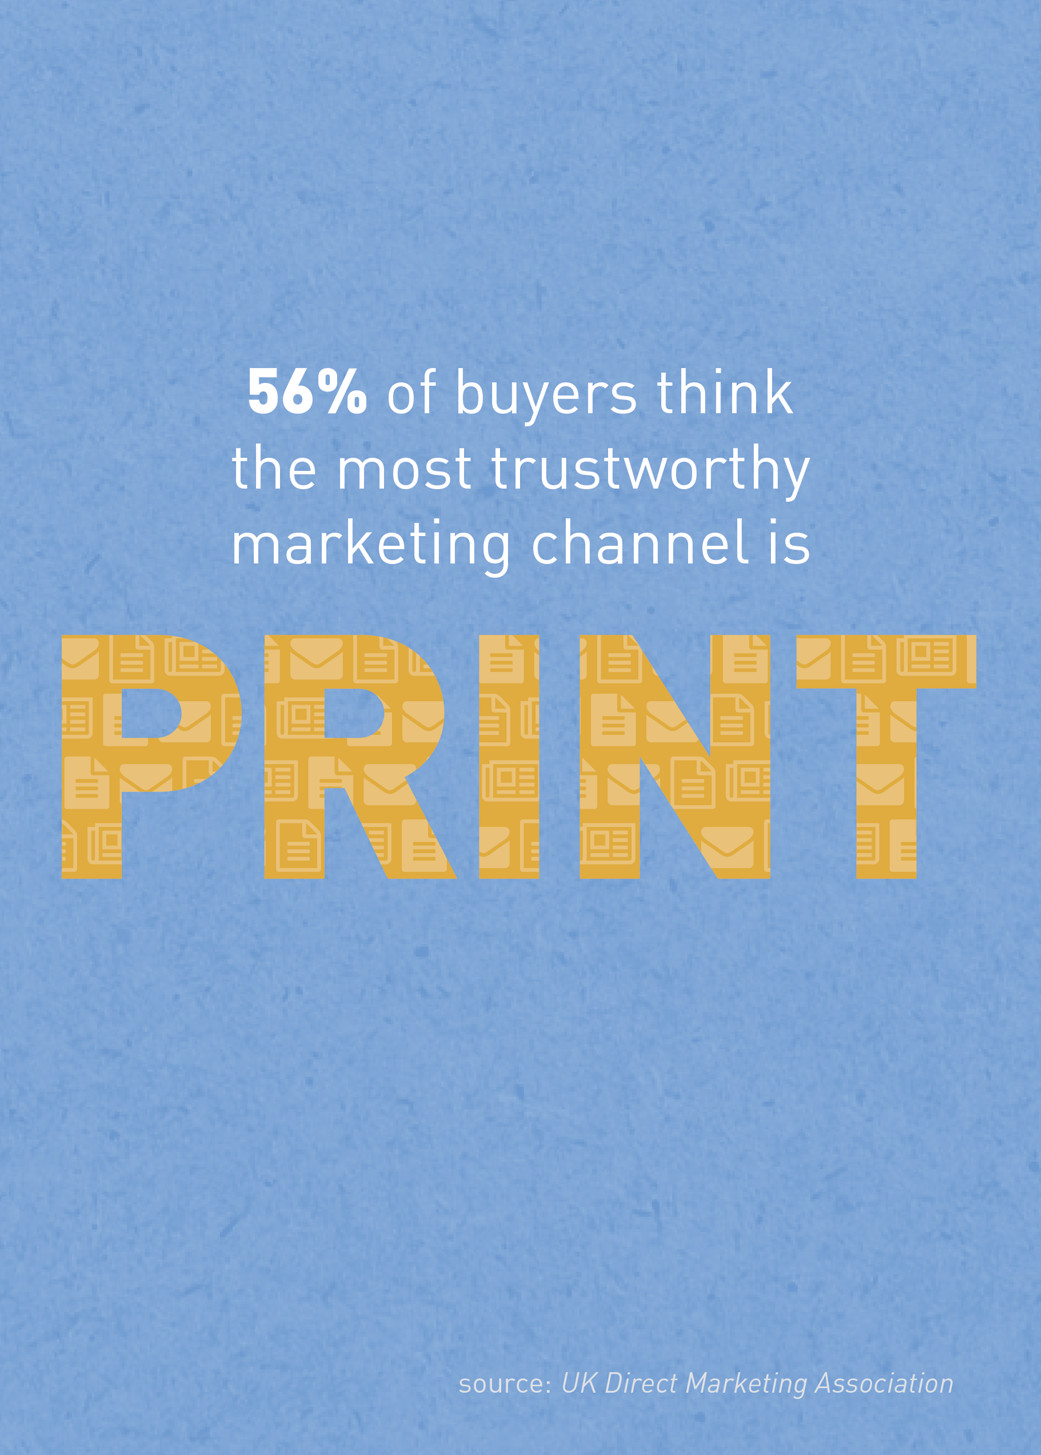 print is the most trustworthy marketing channel according to buyers